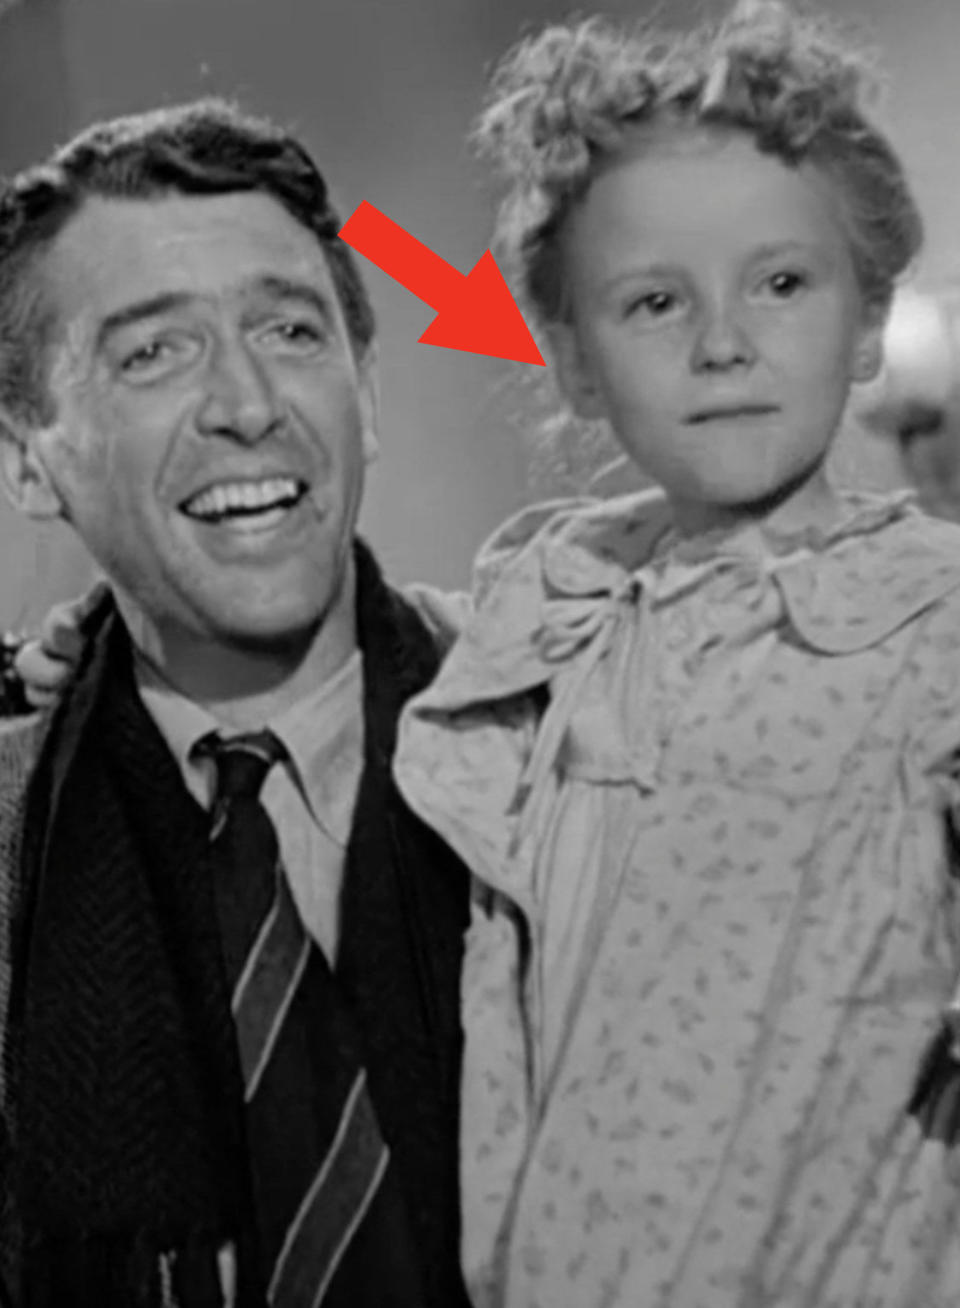 Grimes being held by Jimmy Stewart at the end of "It's a Wonderful Life"